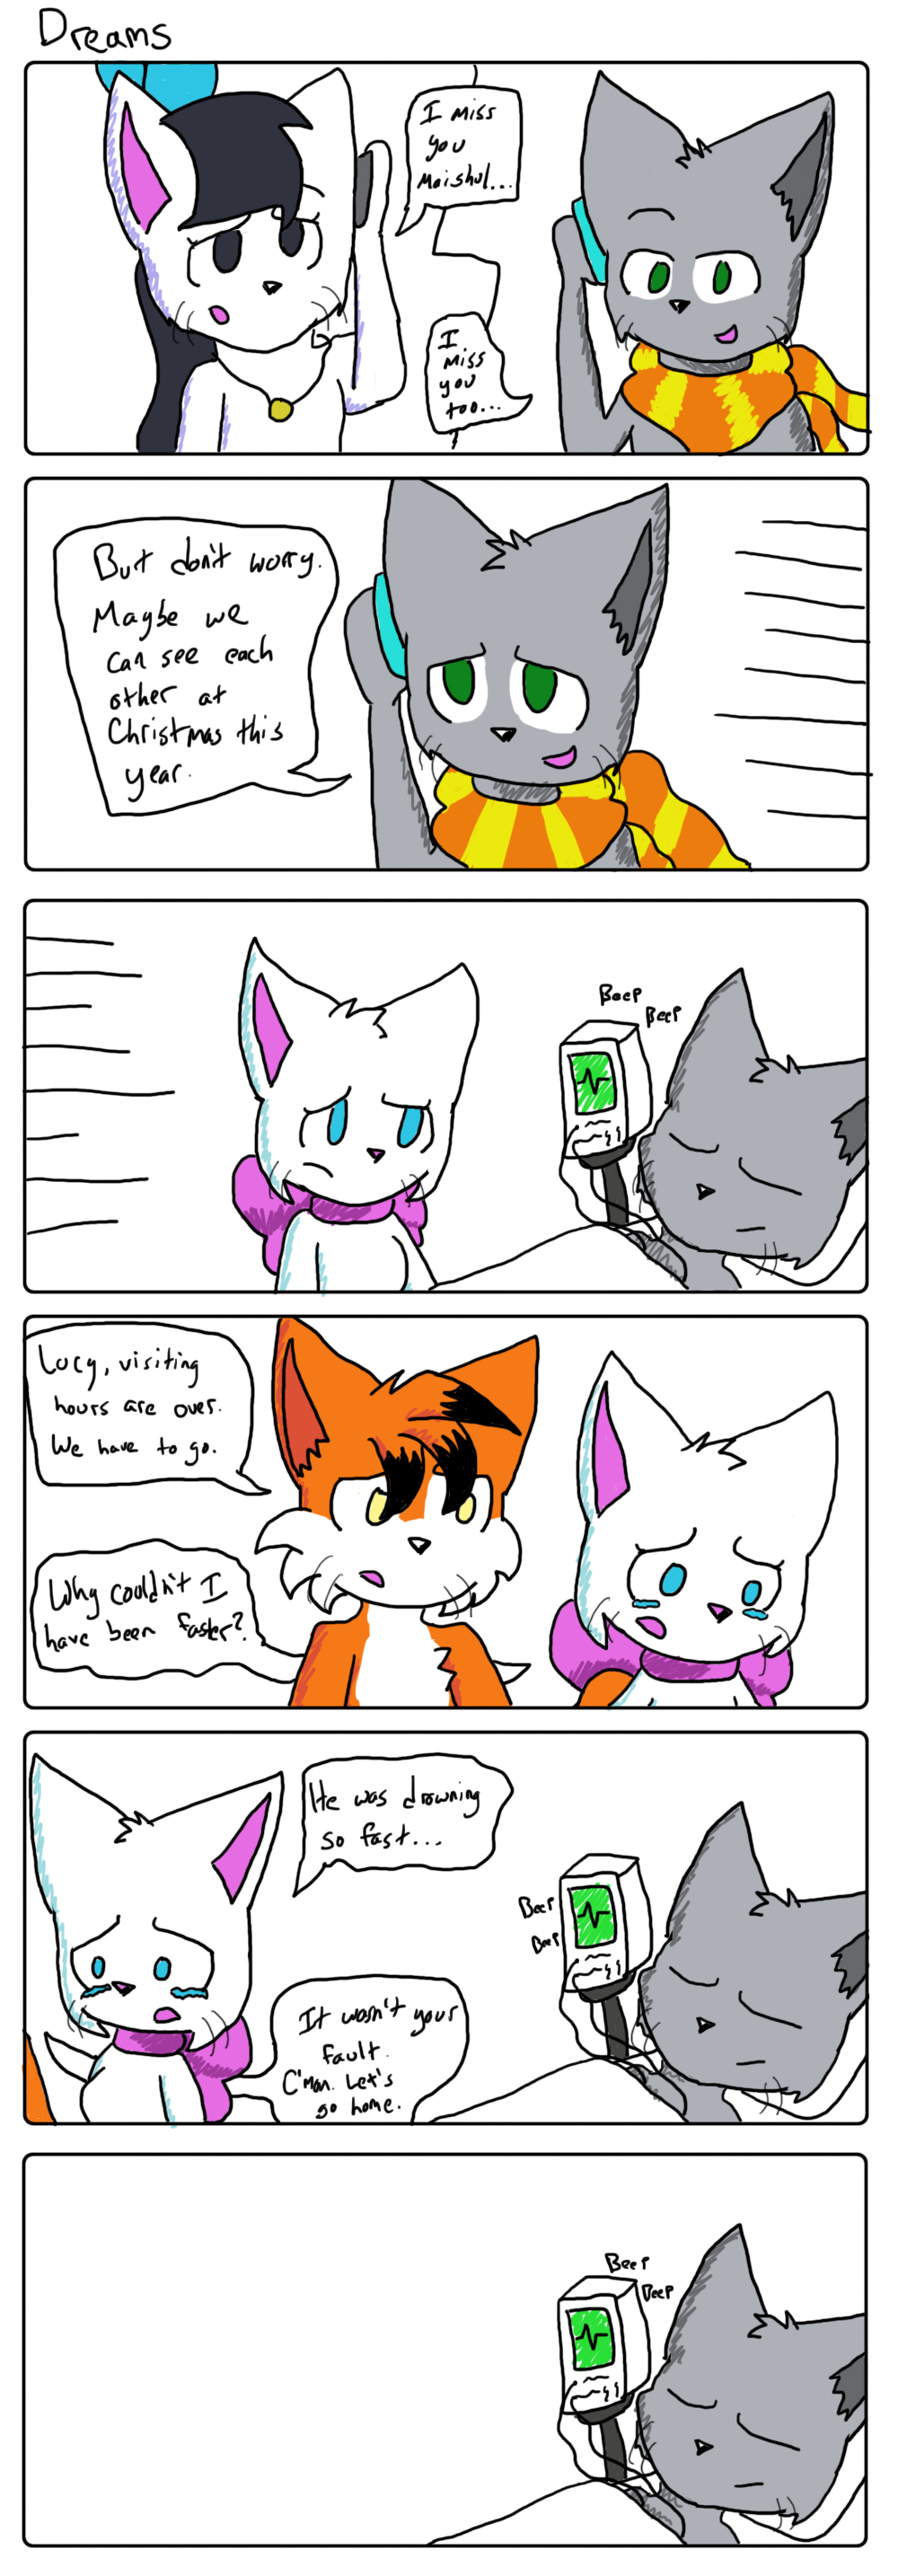 Candybooru image #2432, tagged with Lucy Mike Paulo Sandy SpaceMouse_(Artist) comic